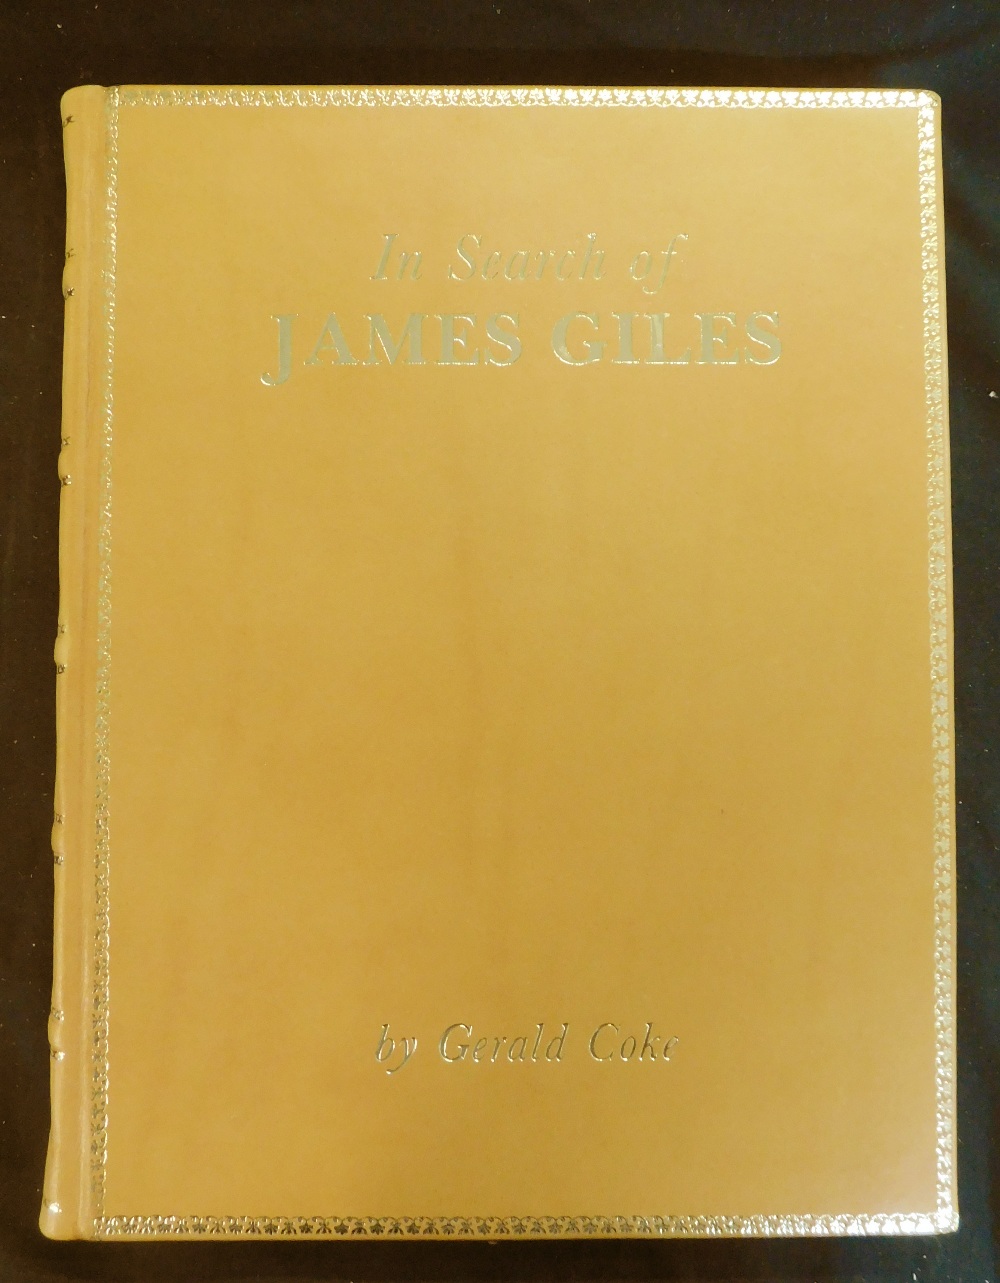 GERALD COKE: IN SEARCH OF JAMES GILES (1718-1780), Wingham Kent, 1983, (250) numbered (237), 4to, - Image 2 of 5